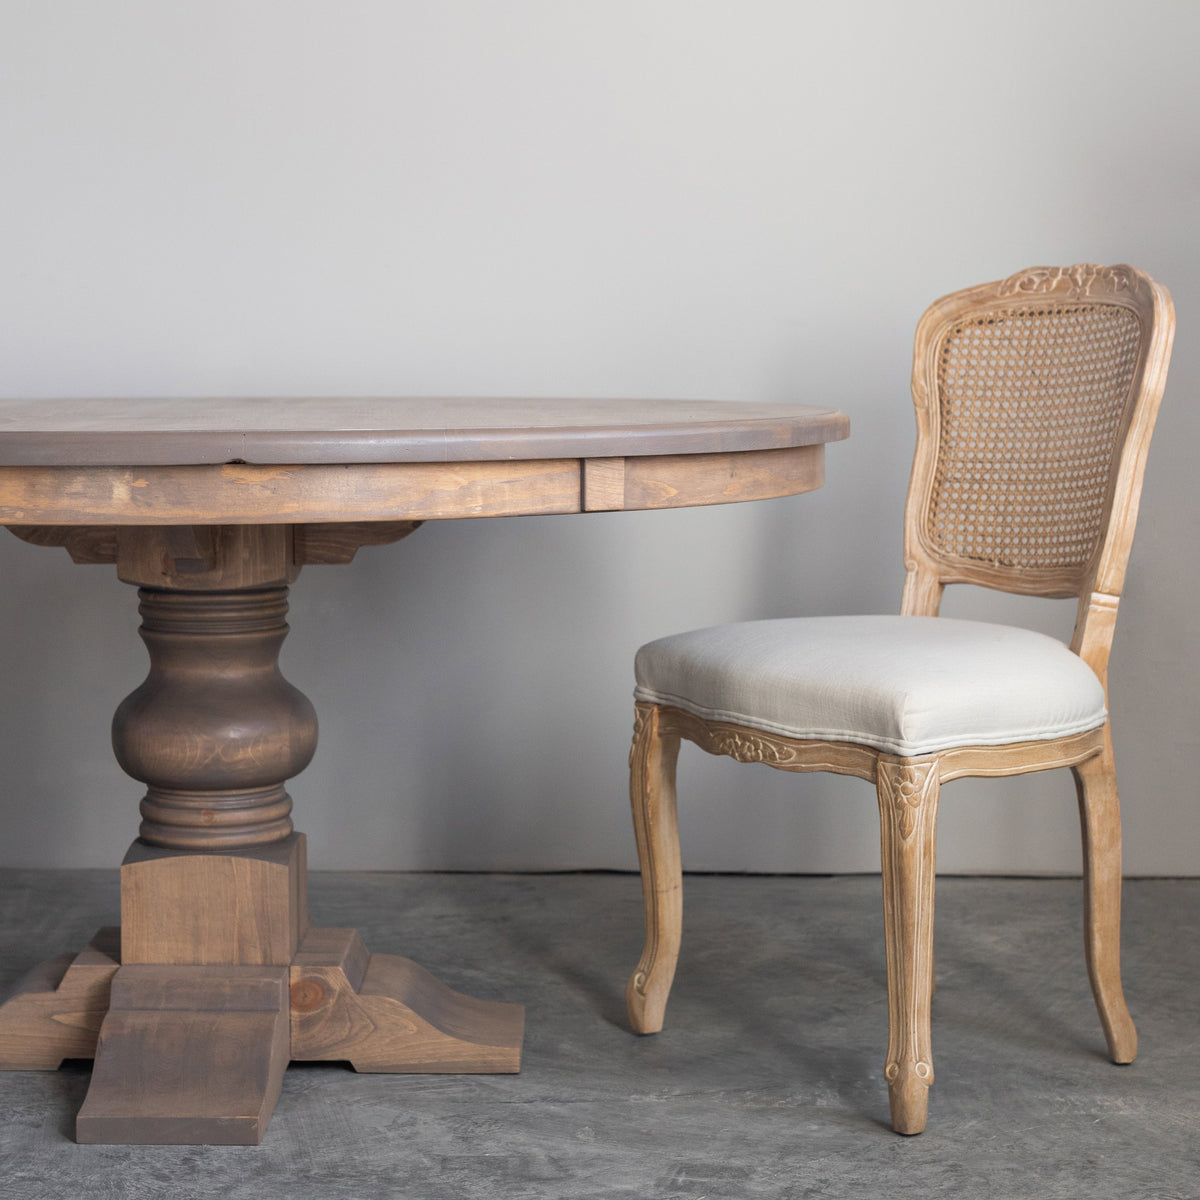 Heritage Round Dining Table